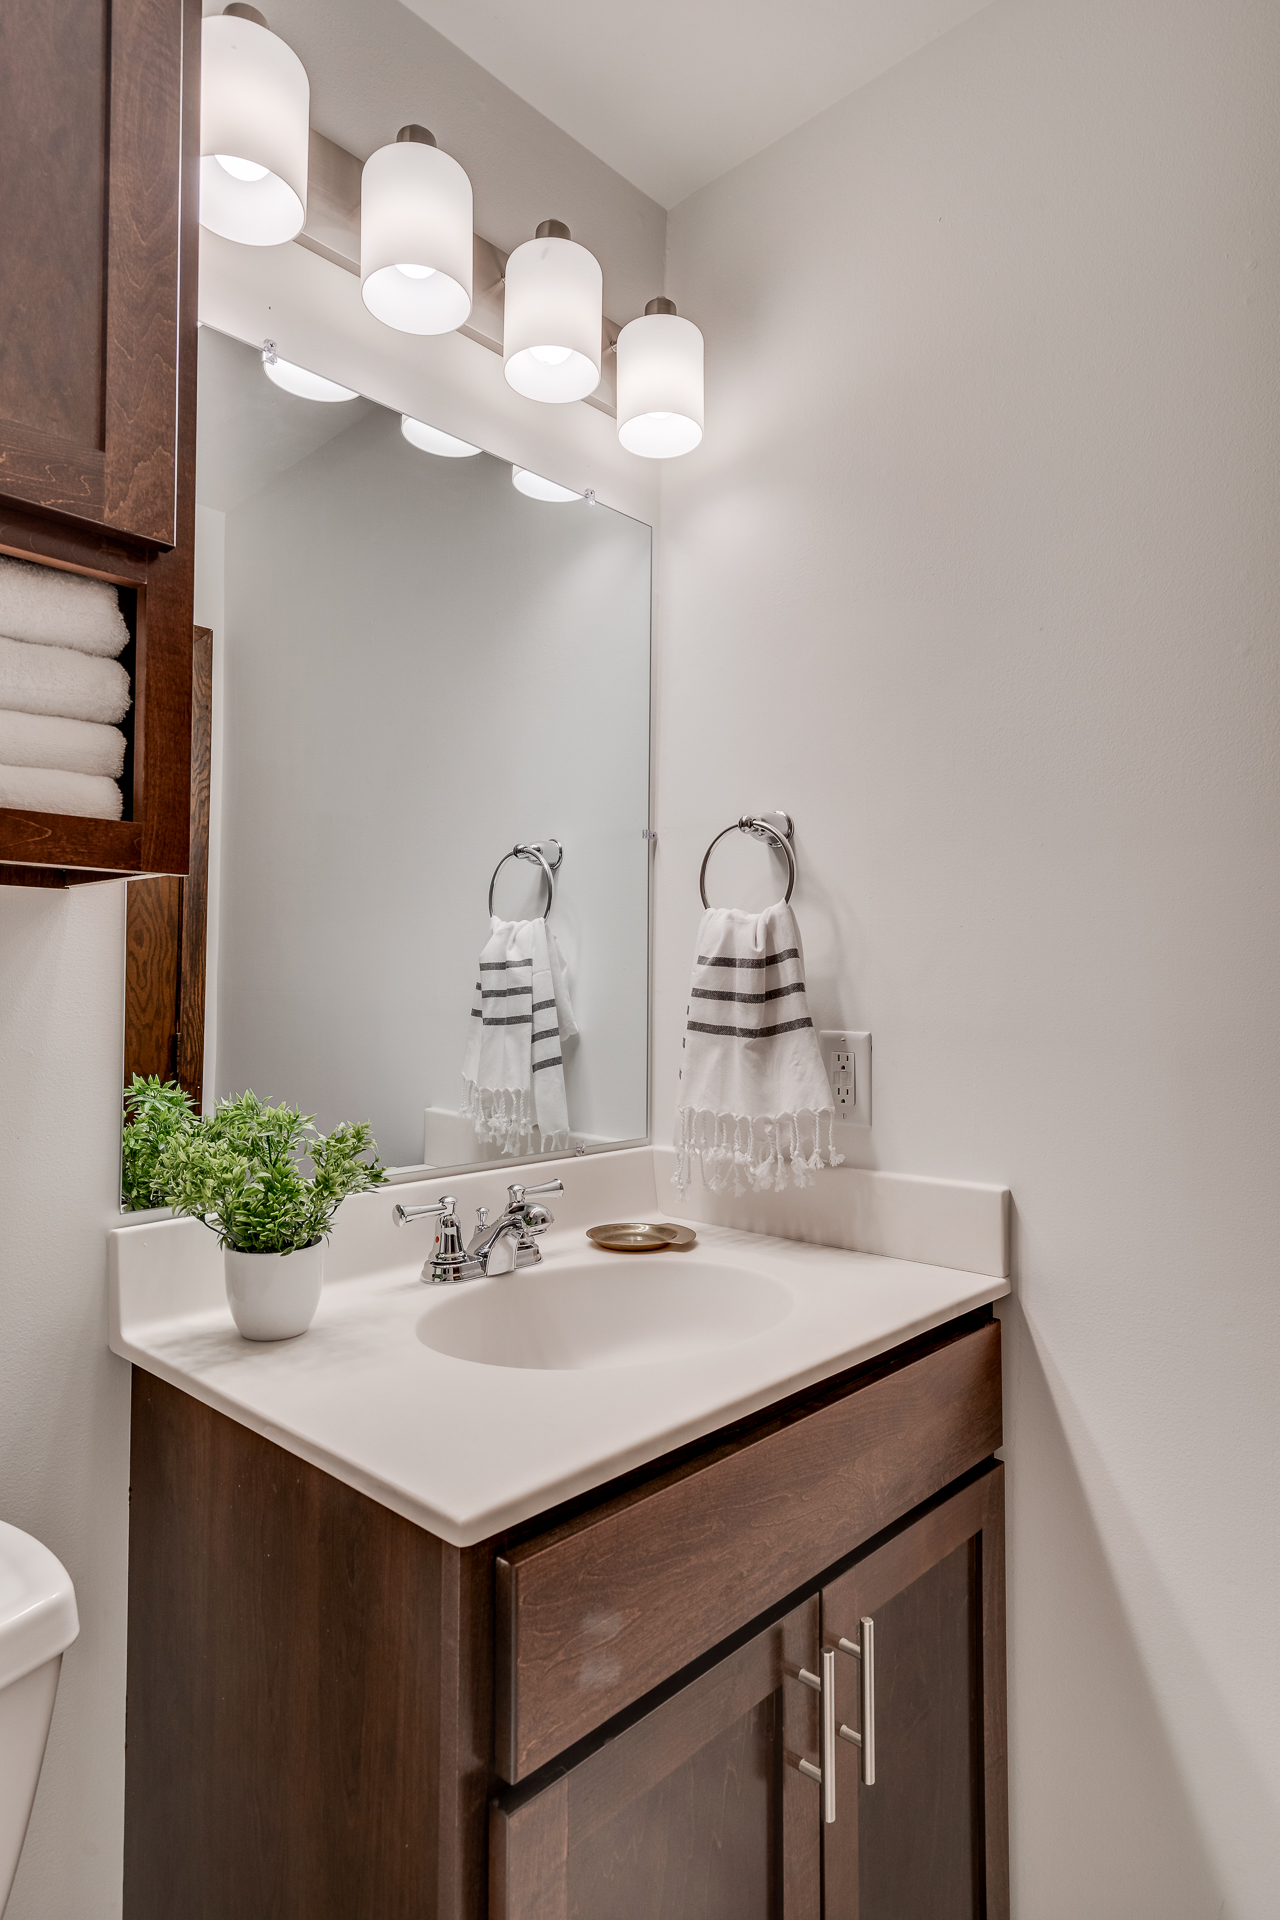 newly remodeled bathroom at a Sumter Green apartments in Crystal, MN